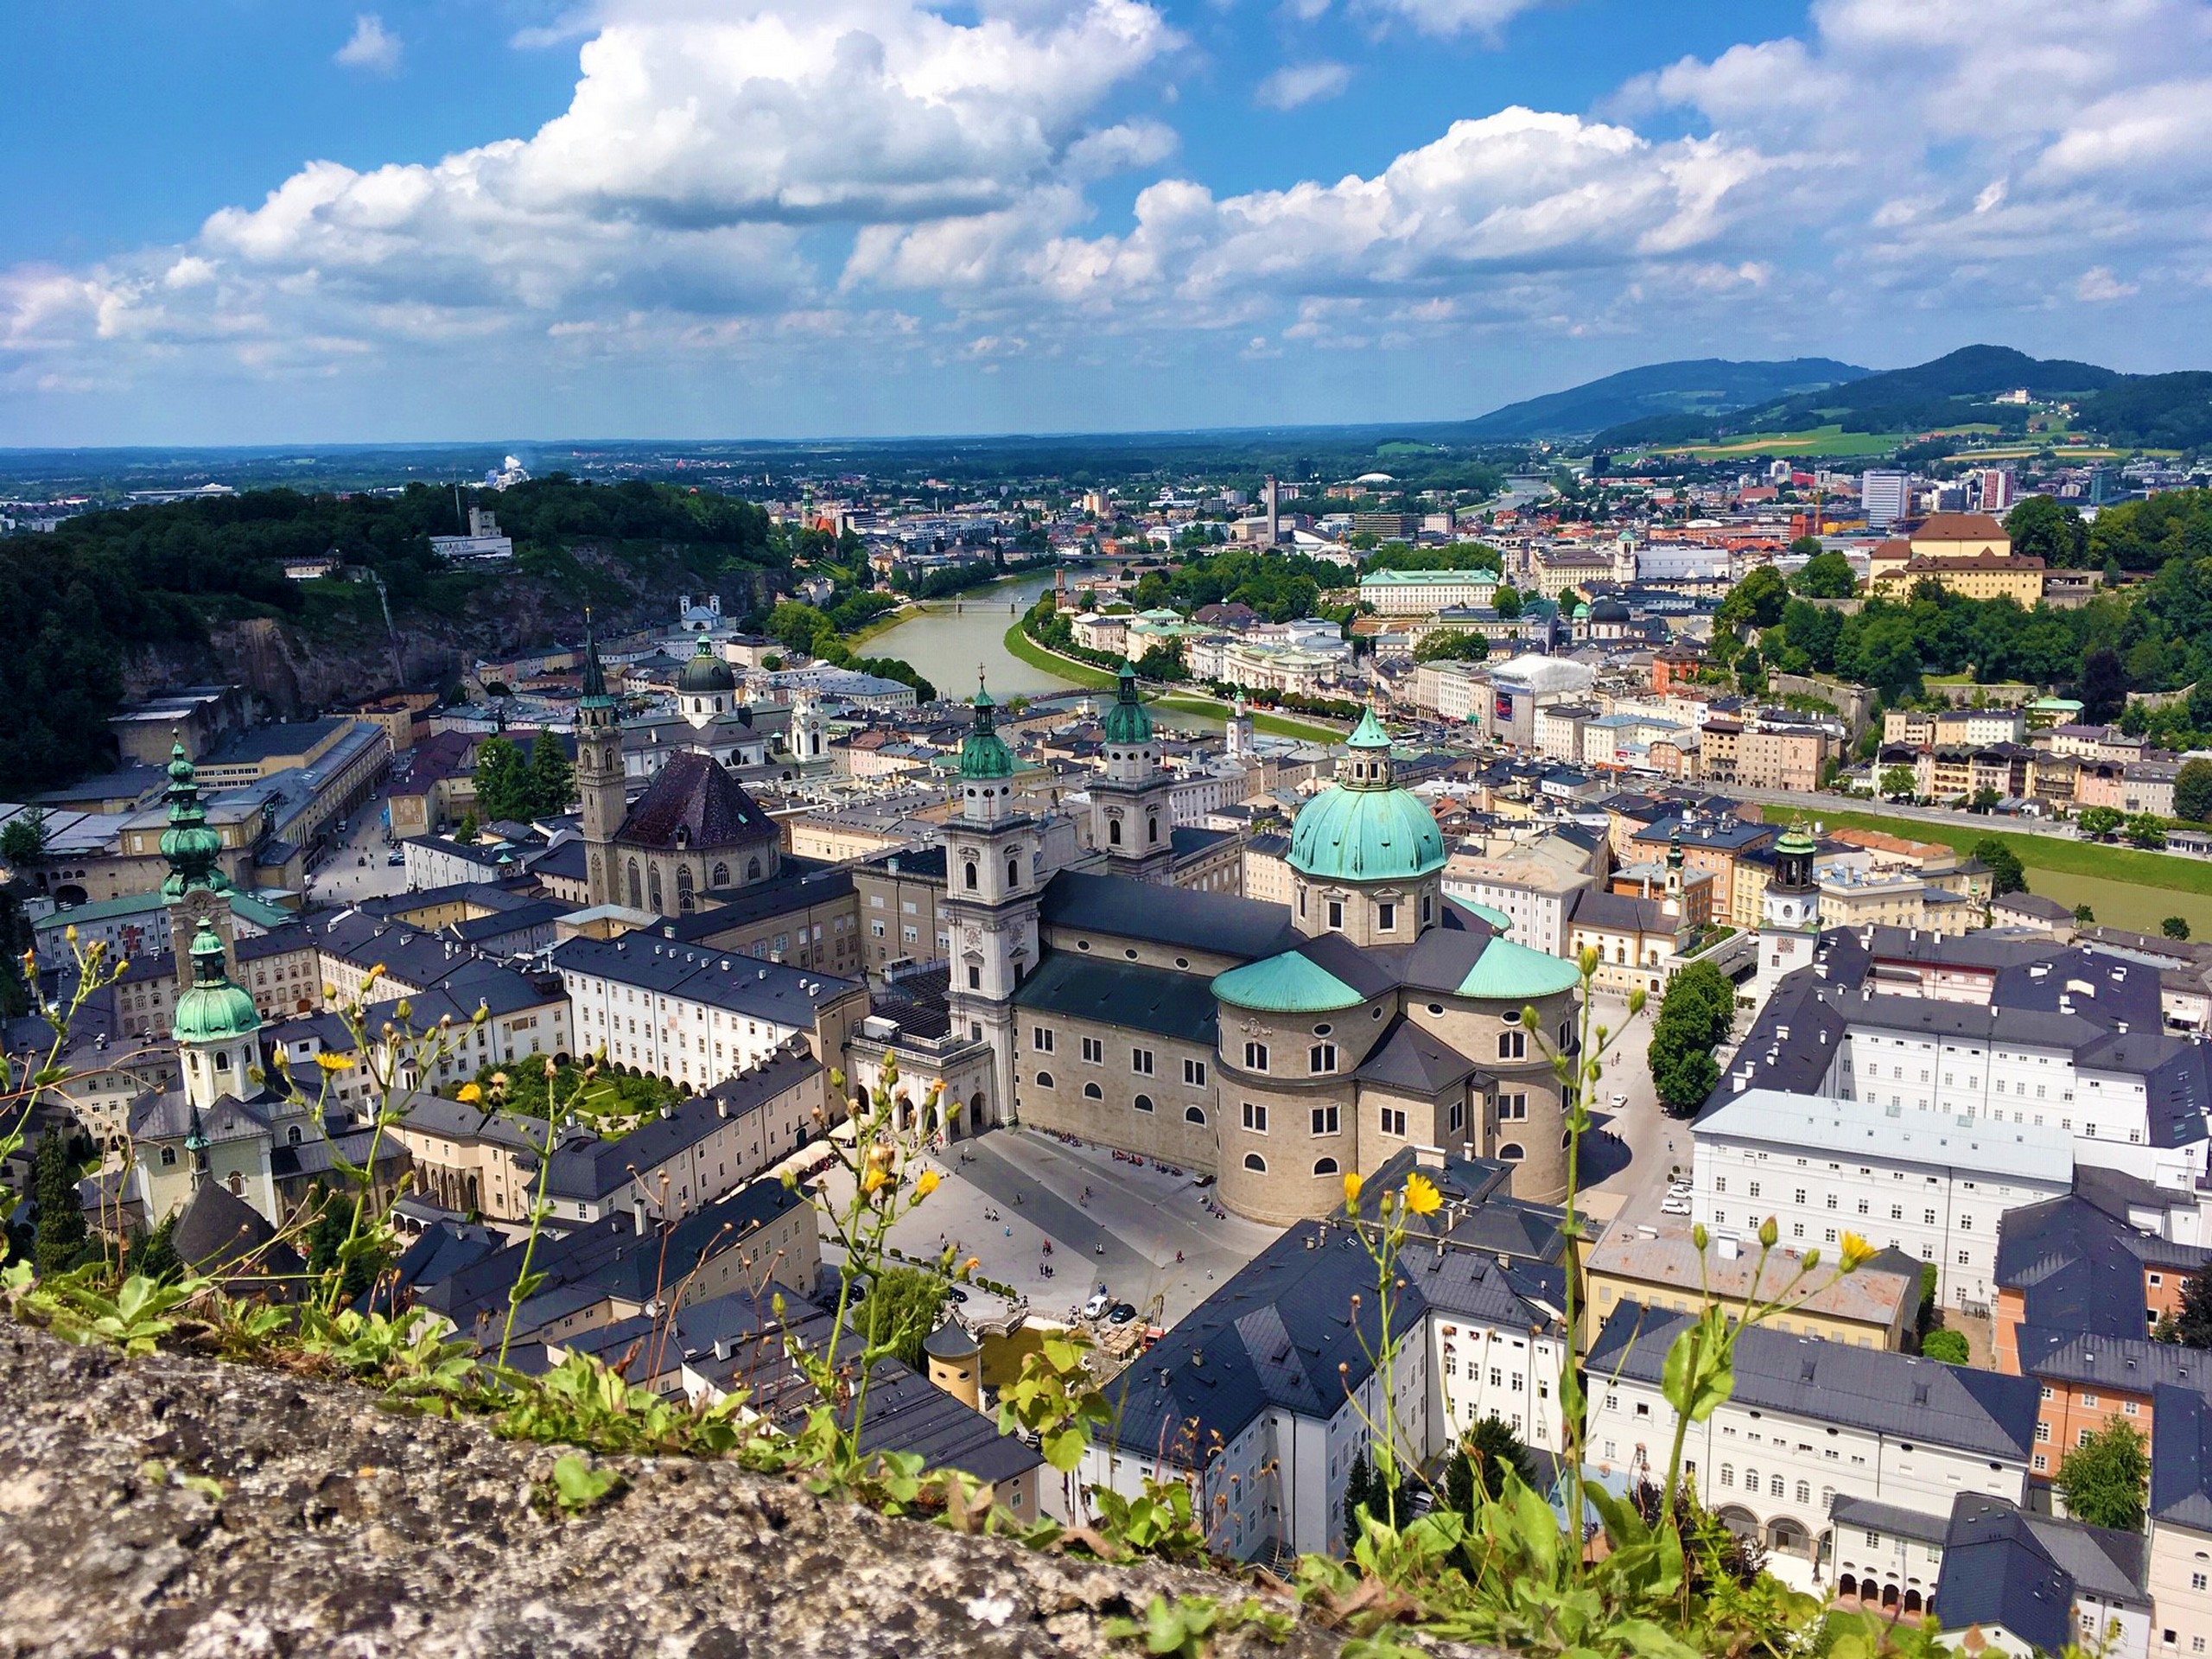 Panoramic views of Salzburg, as seen from the above